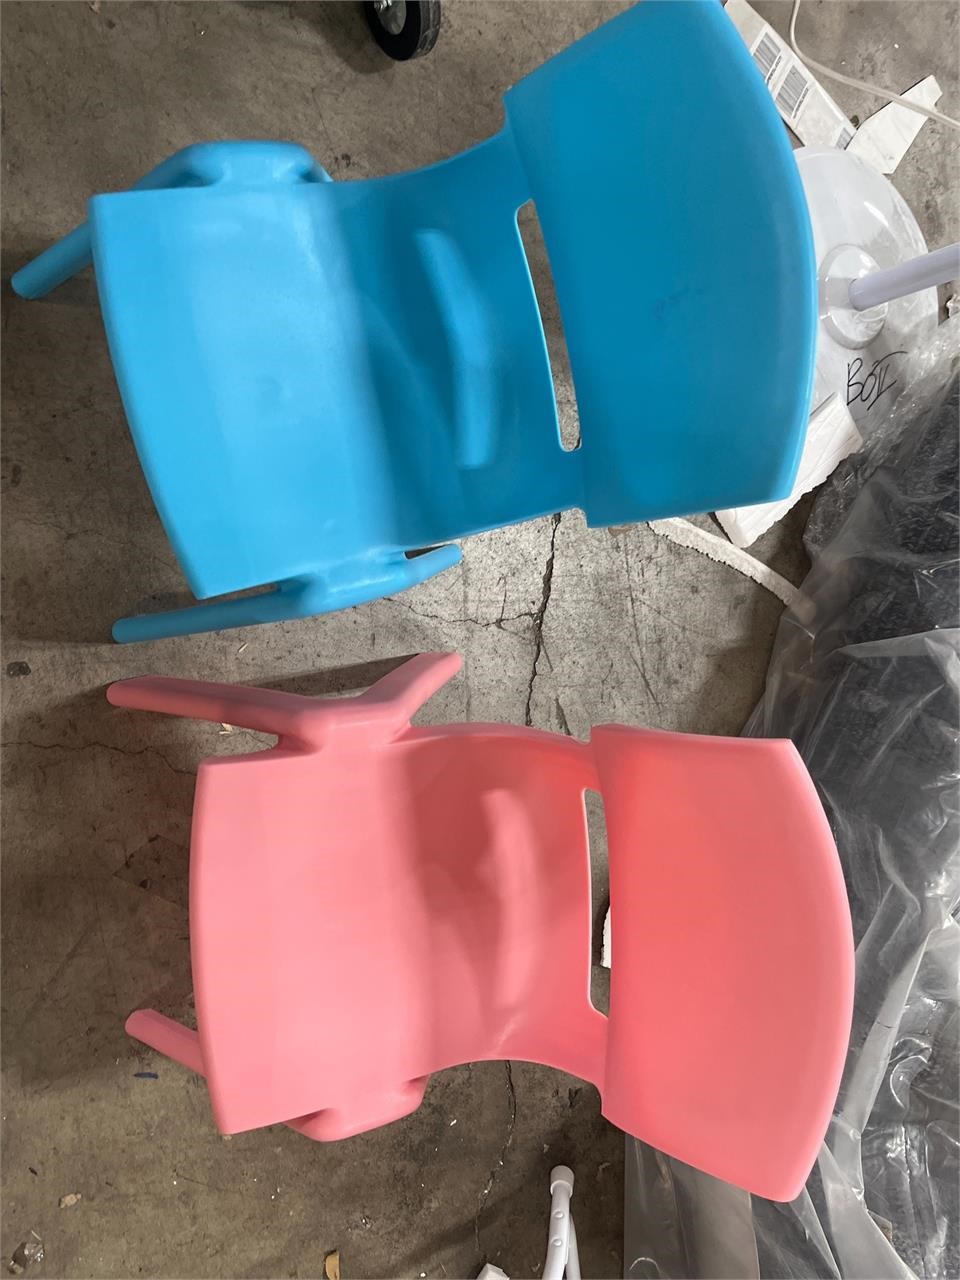 Two little chairs blue  and pink